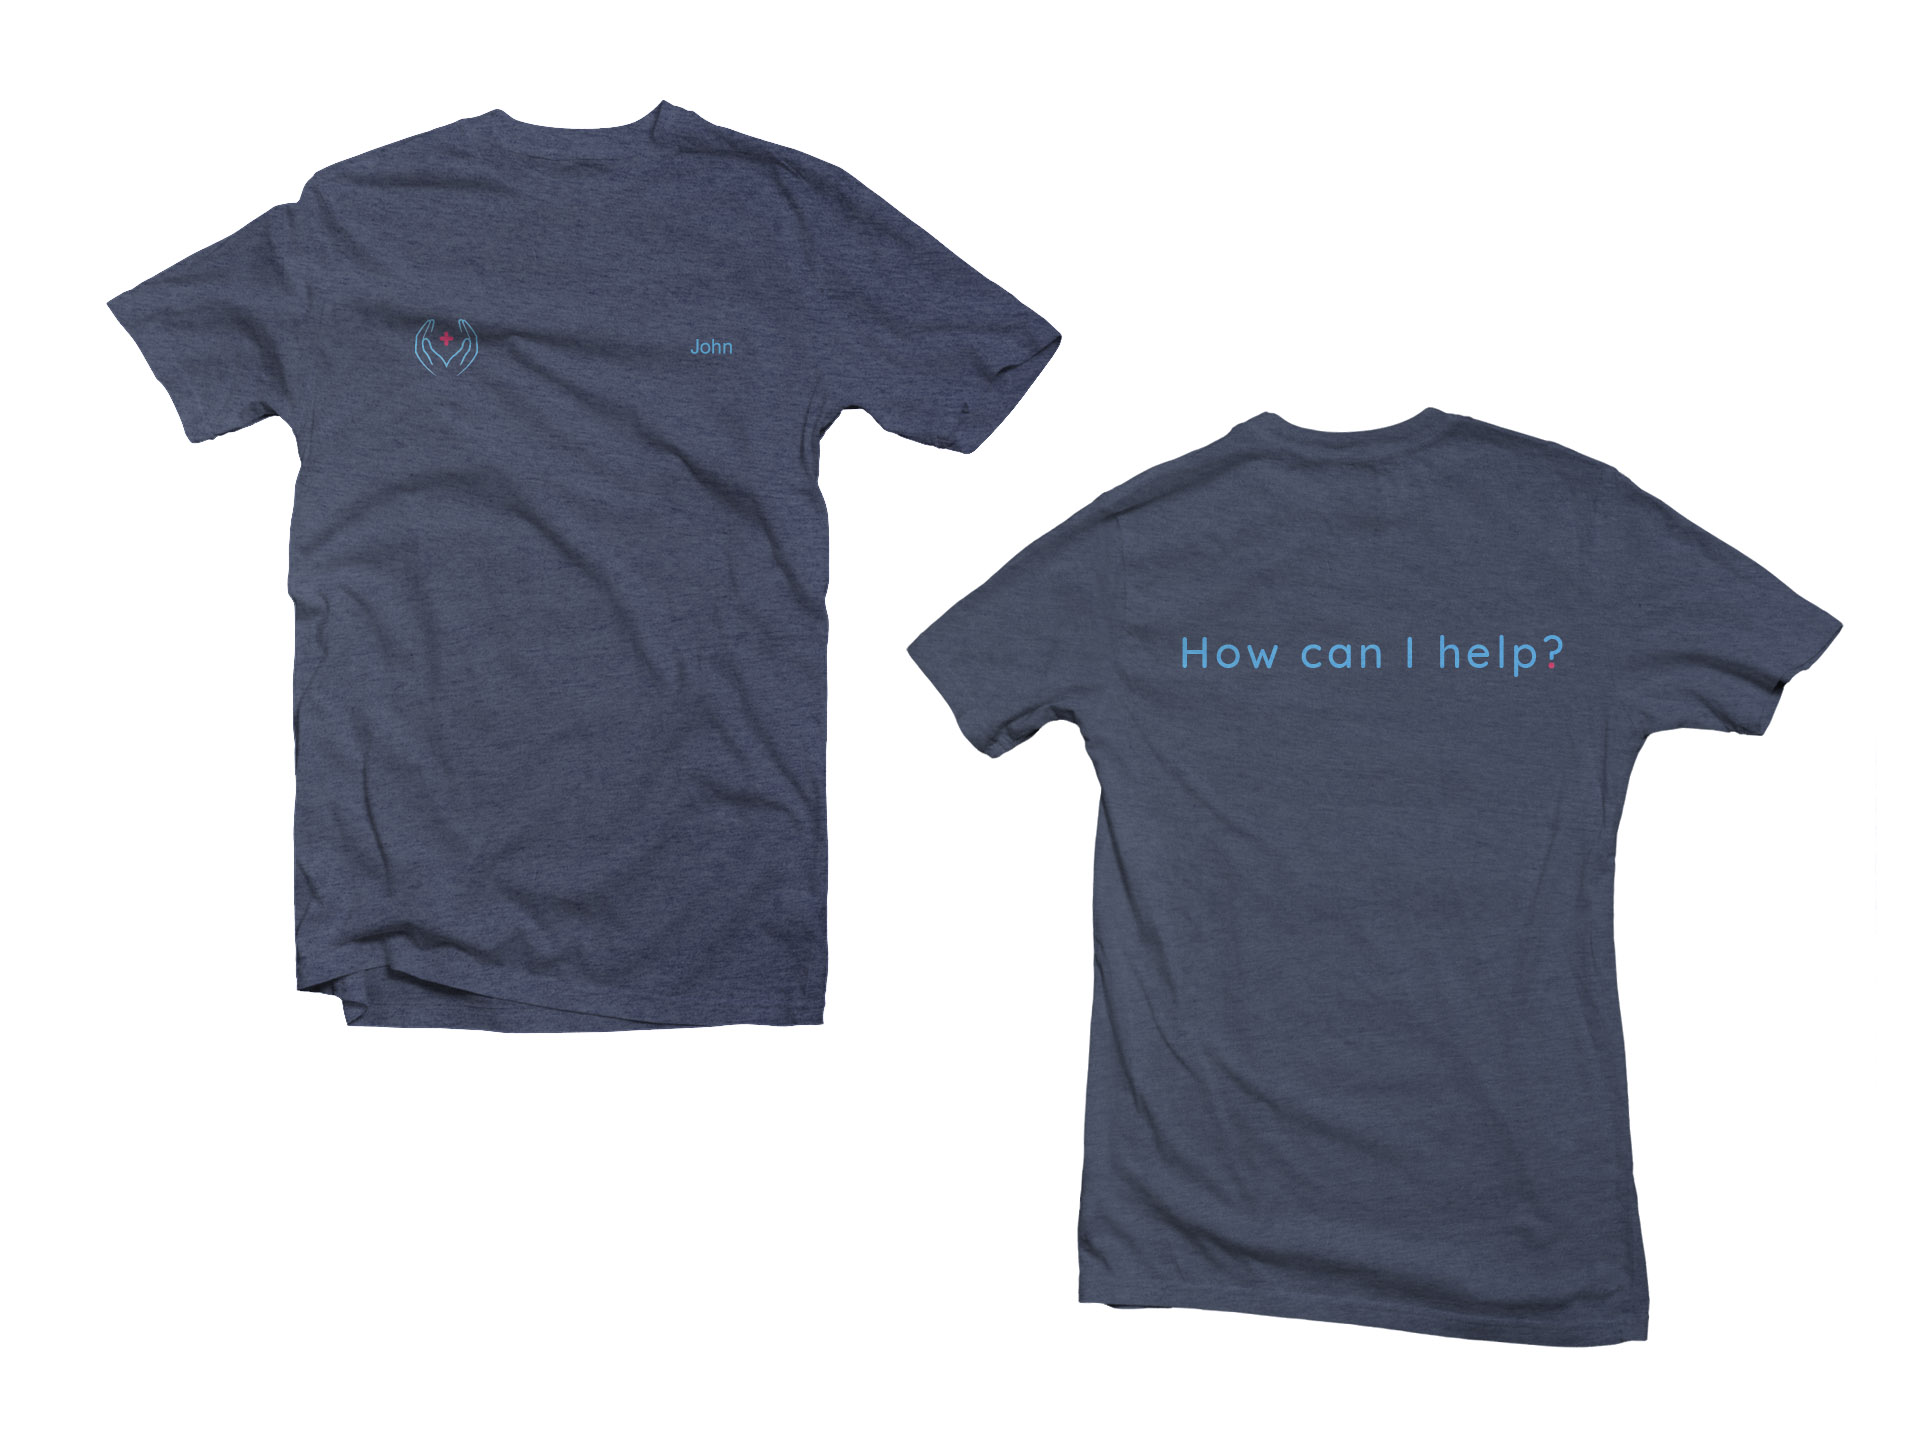 Navy shirts with Helping Hands logo, volunteer's name, and How Can I Help on the back.